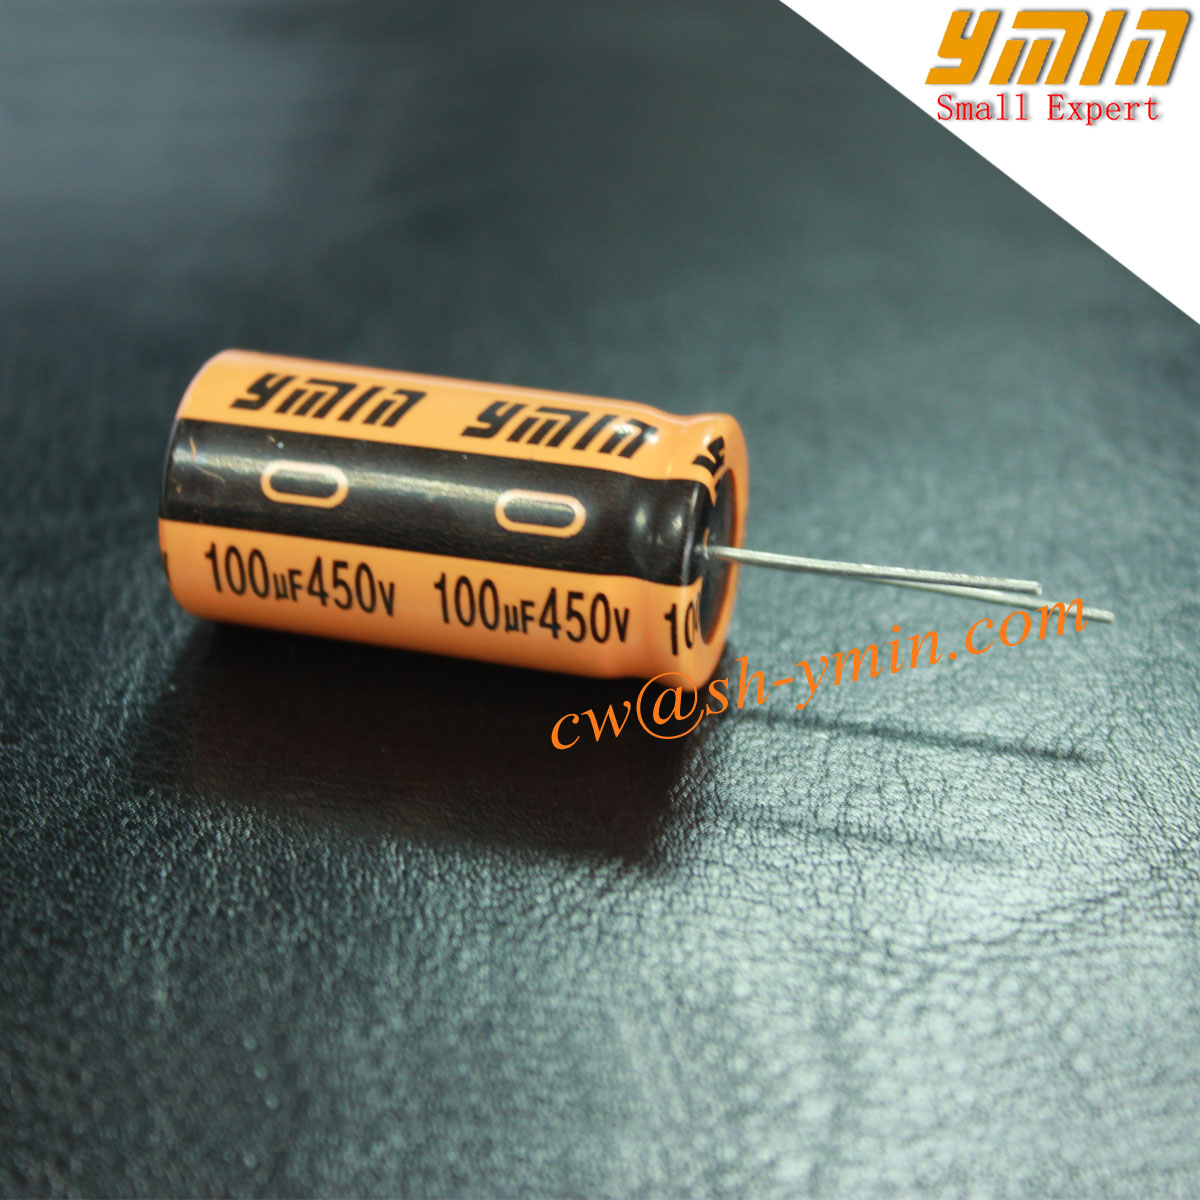 450V 100uF Capacitor Radial Aluminium Electrolytic Capacitor for LED Driver RoHS